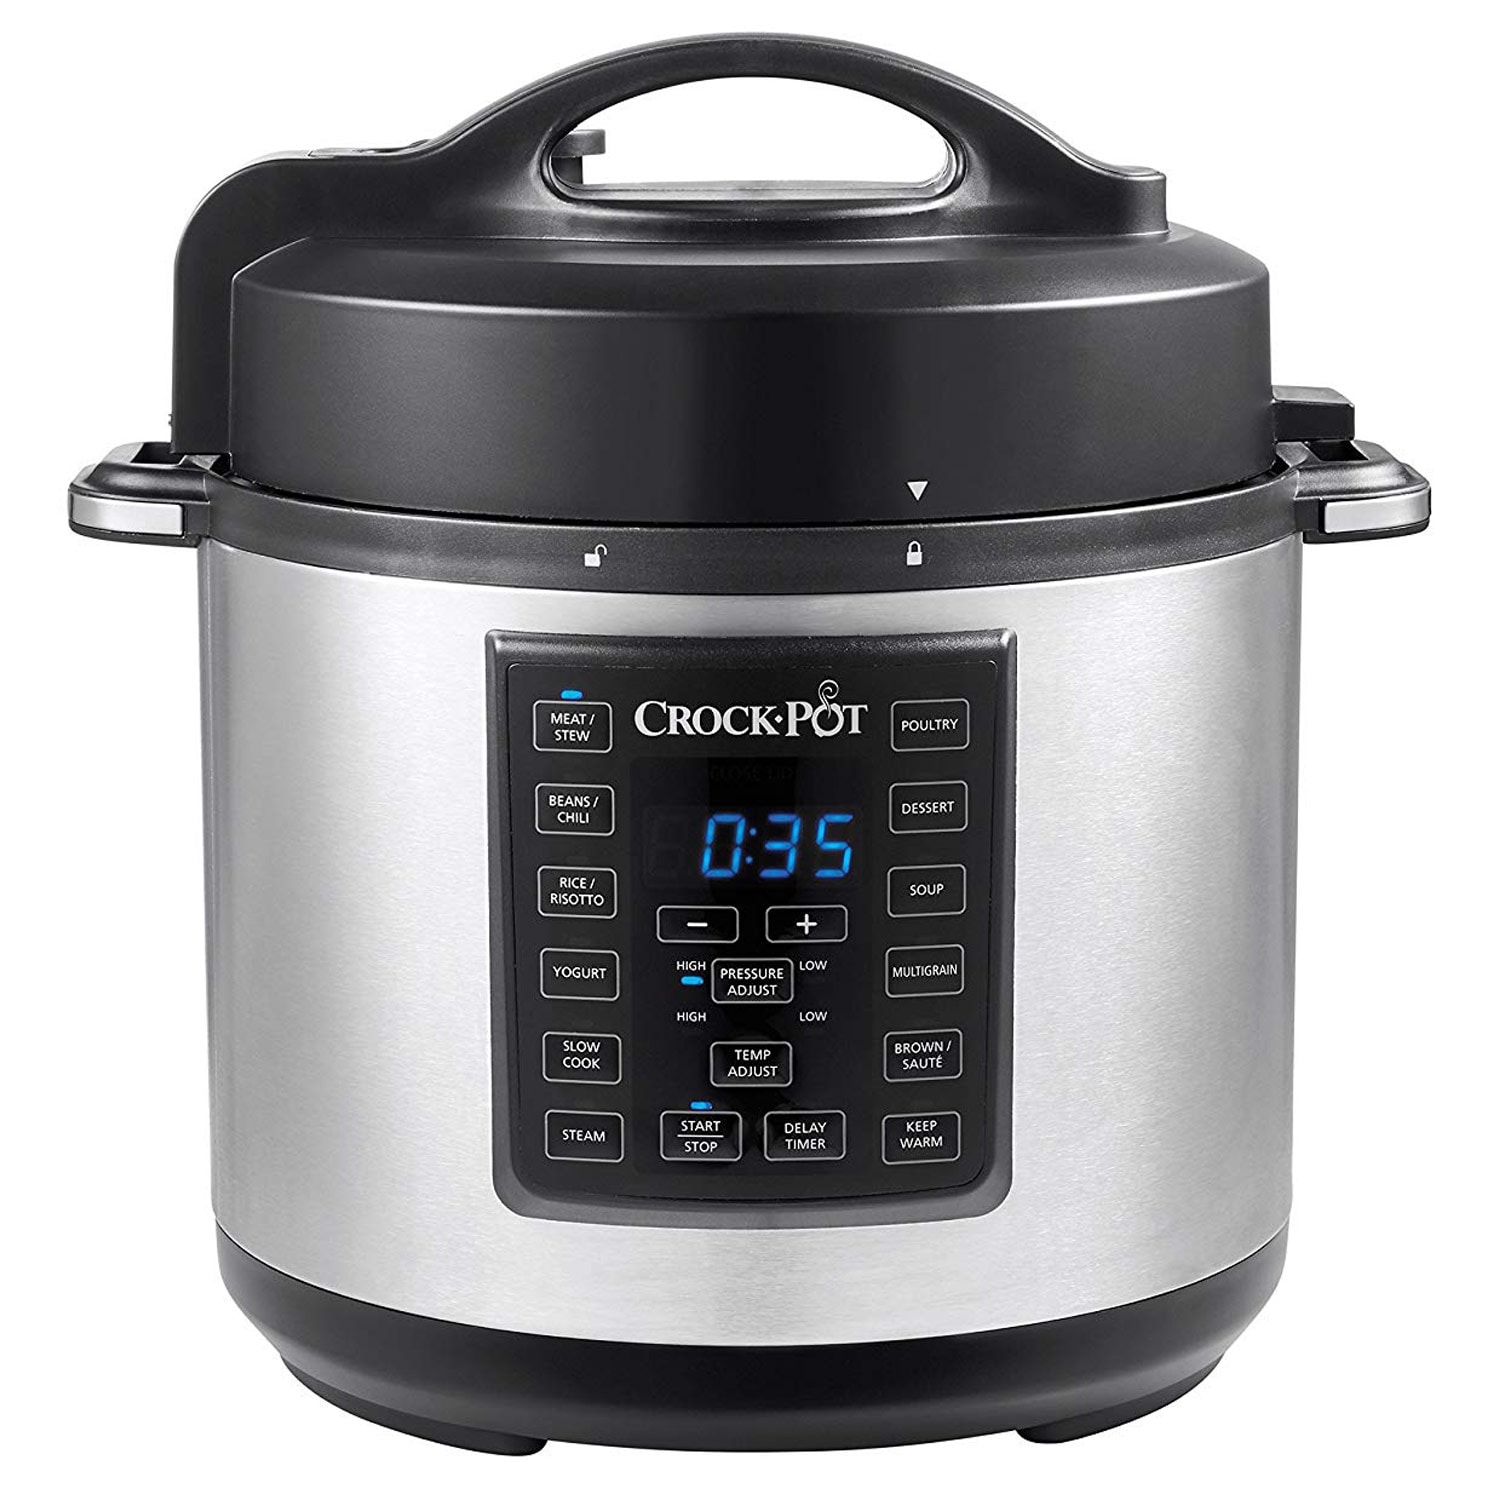 https://ak1.ostkcdn.com/images/products/is/images/direct/13dd41ba9a73bd3cde5cb0daf252f638d4b37c94/Crock-Pot-8-In-1-Multi-Use-Express-Cooker%2C-Silver-Black%2C-6-Quarts.jpg